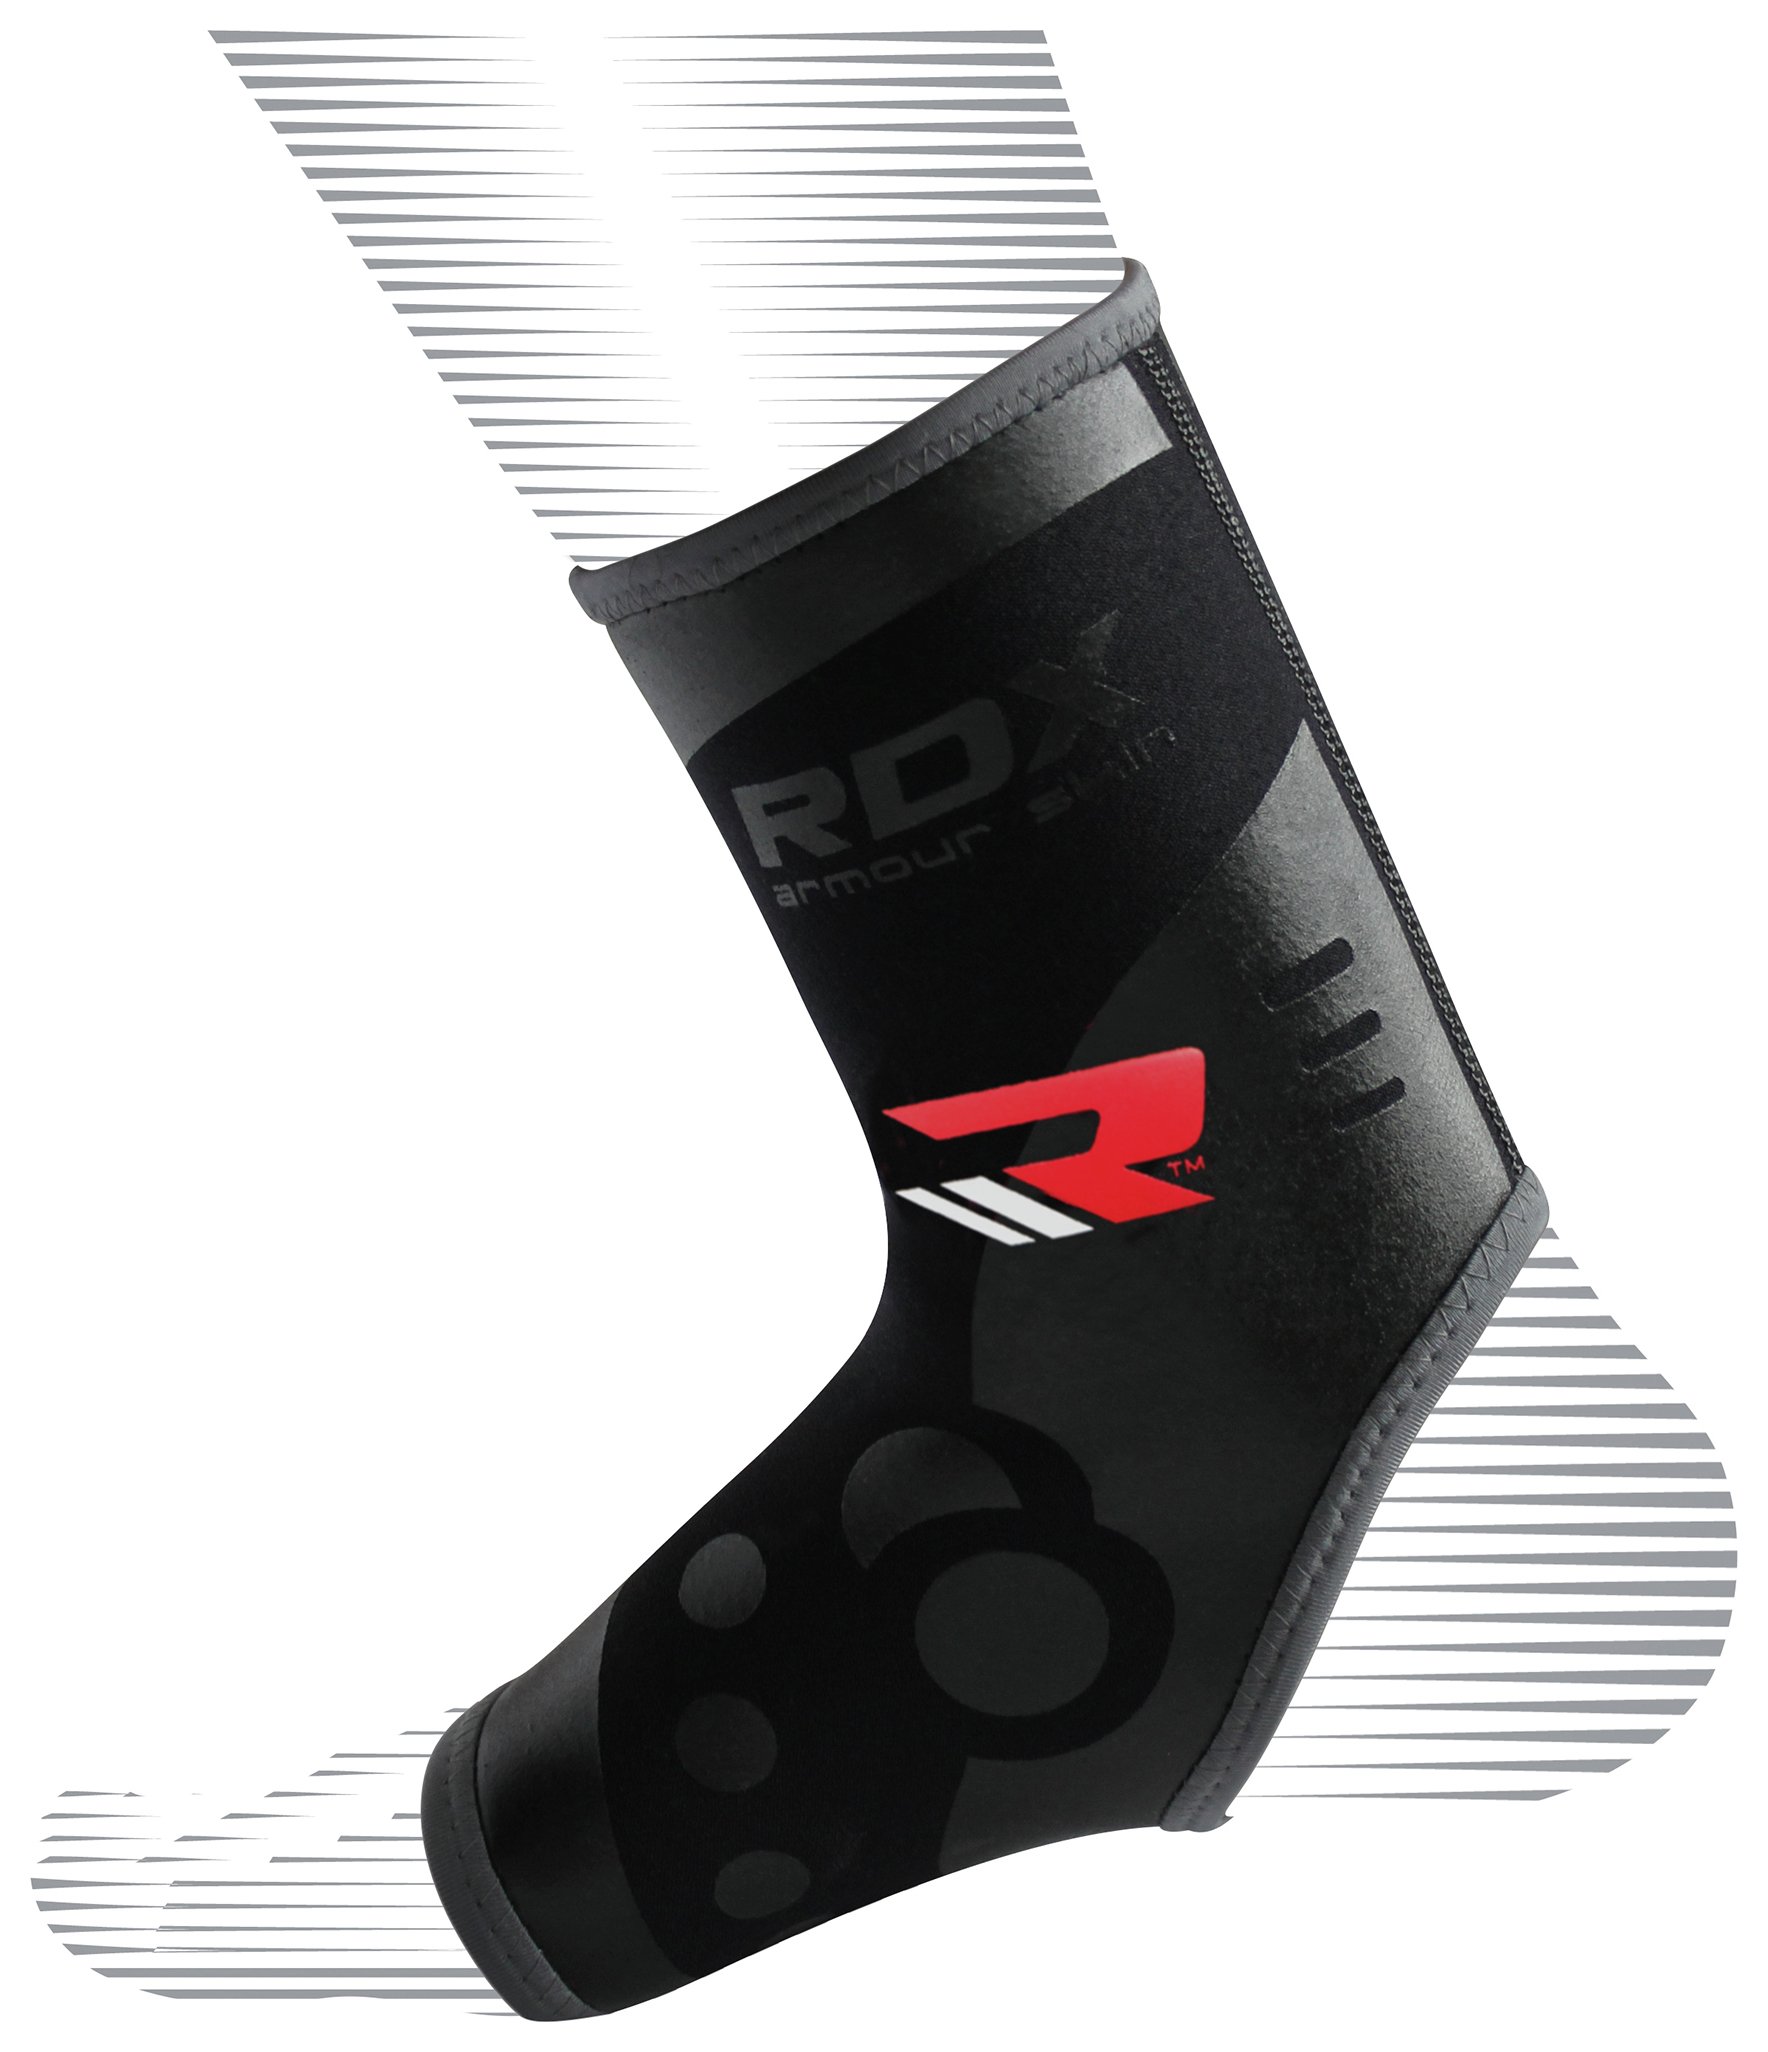 RDX Large to Extra Large Ankle Support - Black.